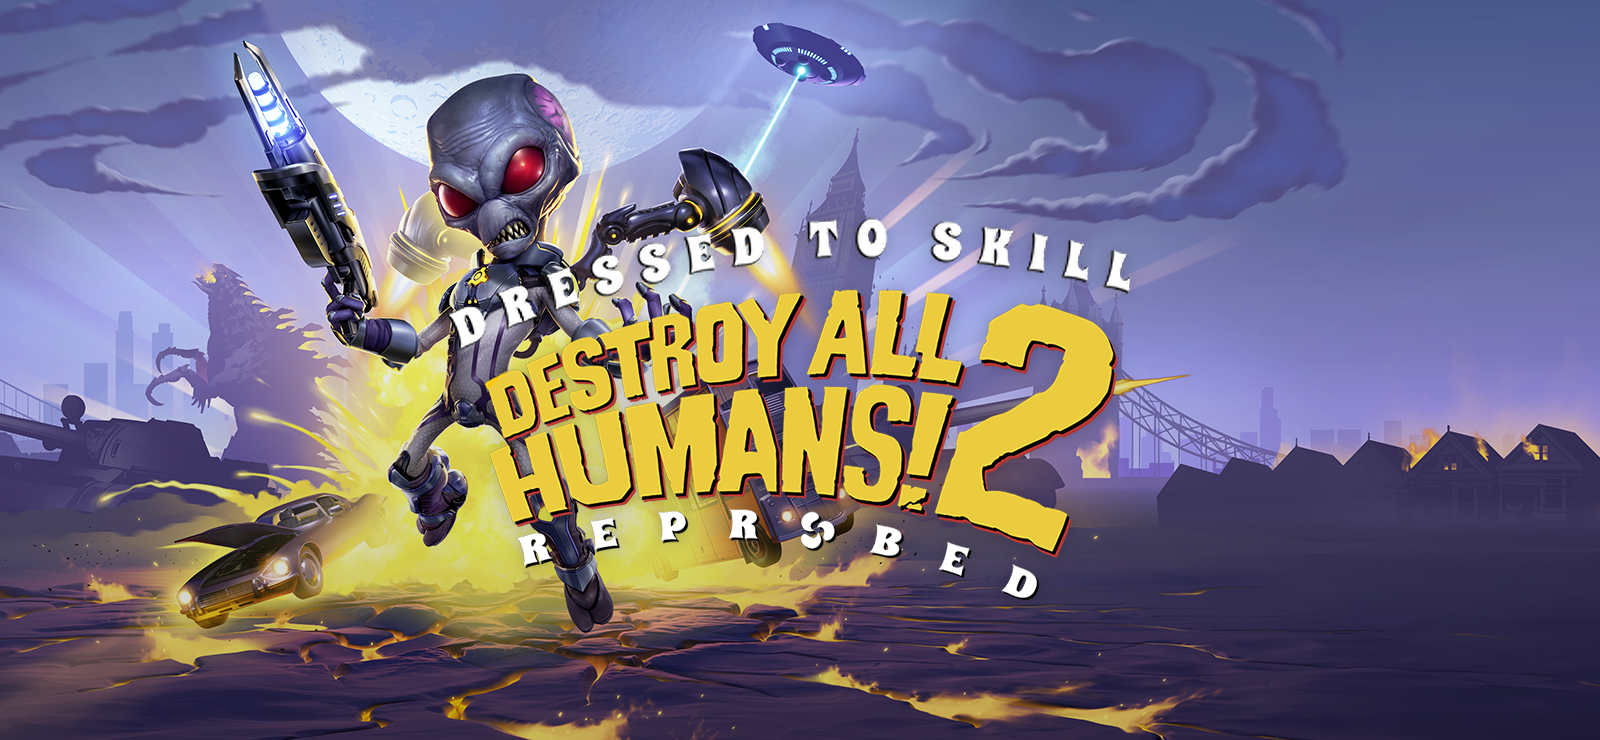 Destroy All Humans! 2 - Reprobed: Dressed To Skill Edition